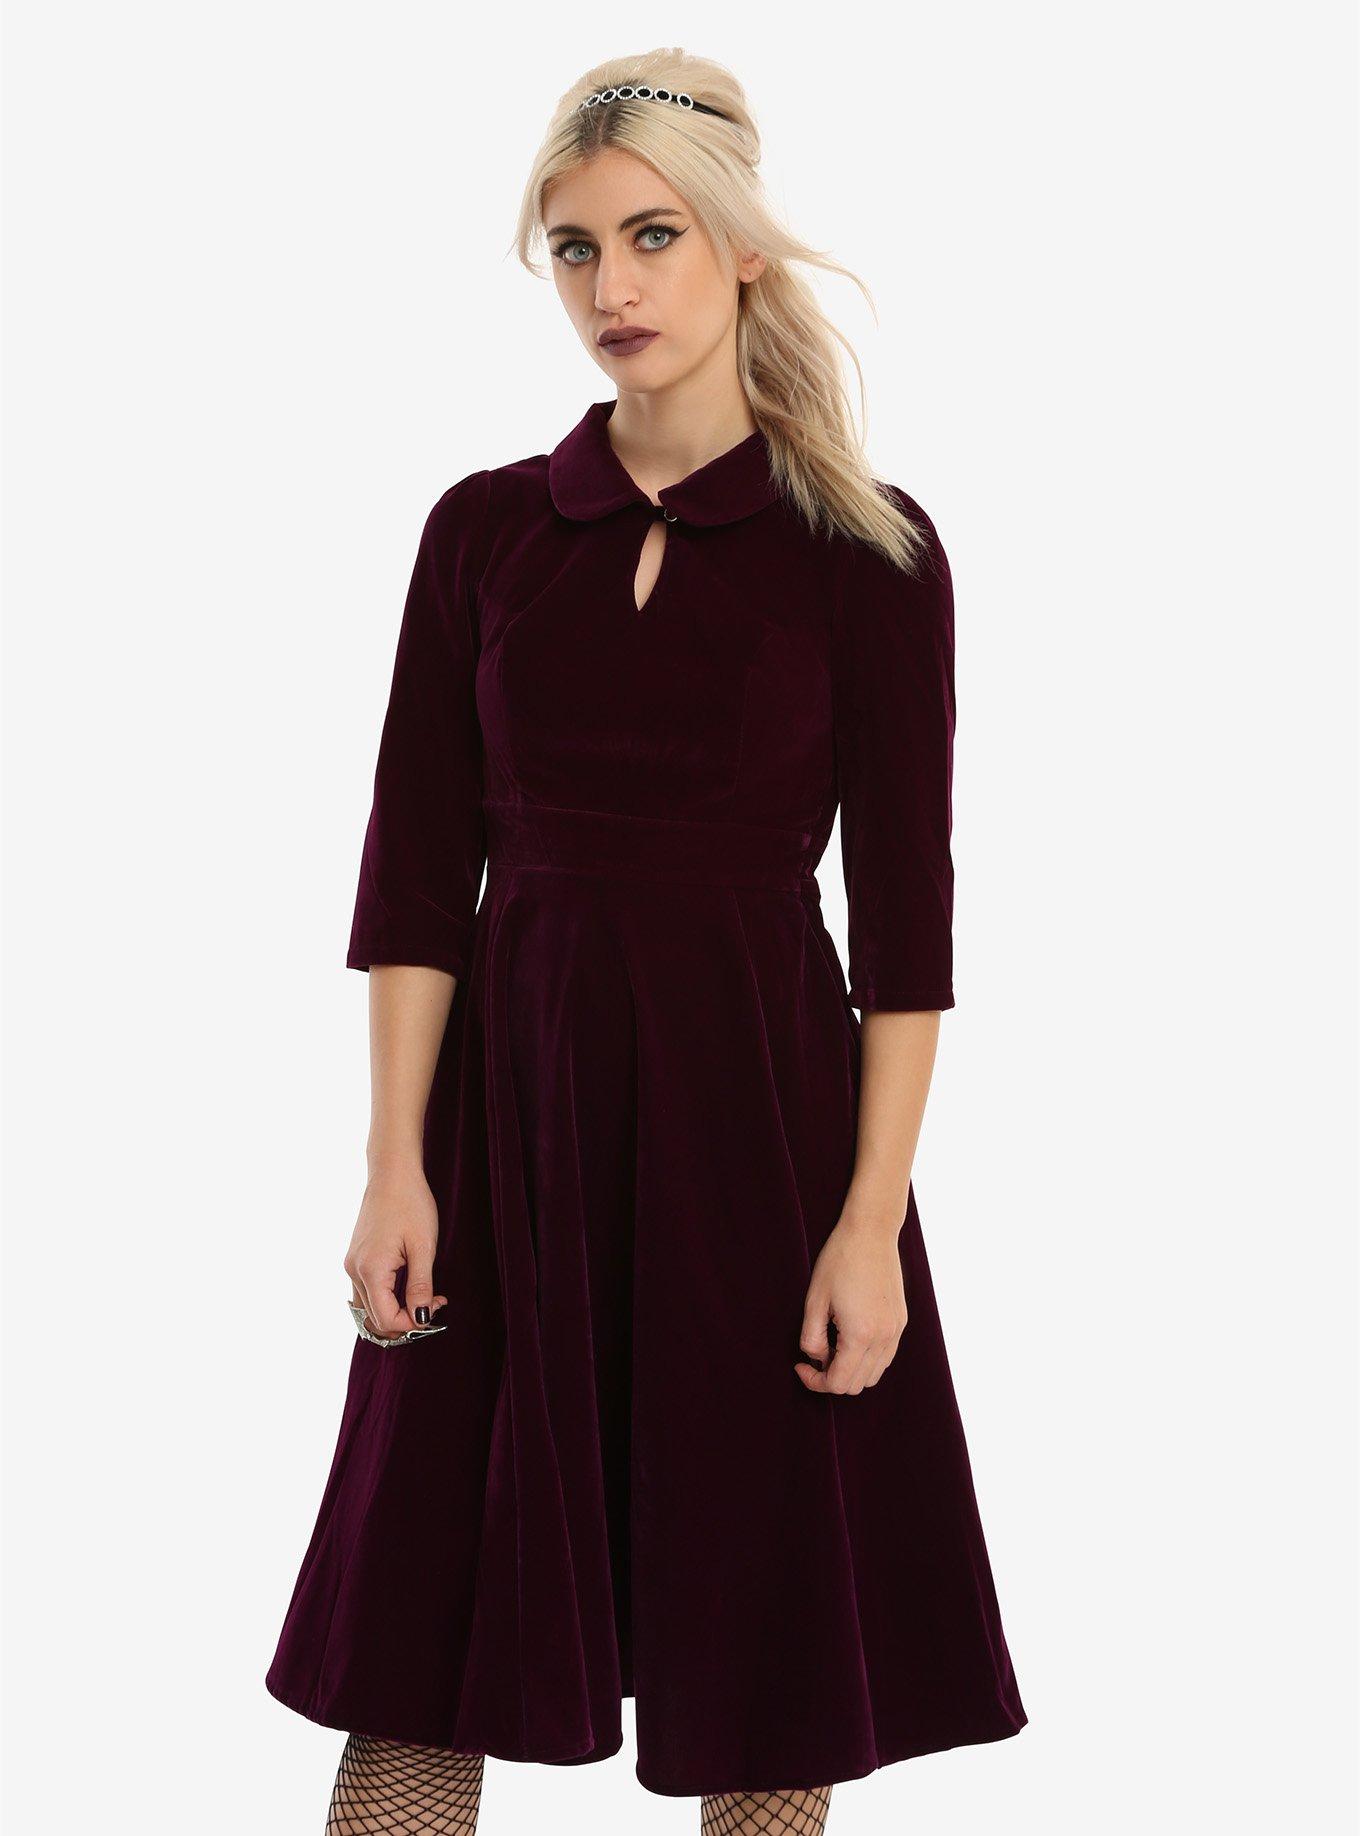 Eggplant Collared Fit & Flare Dress | Hot Topic